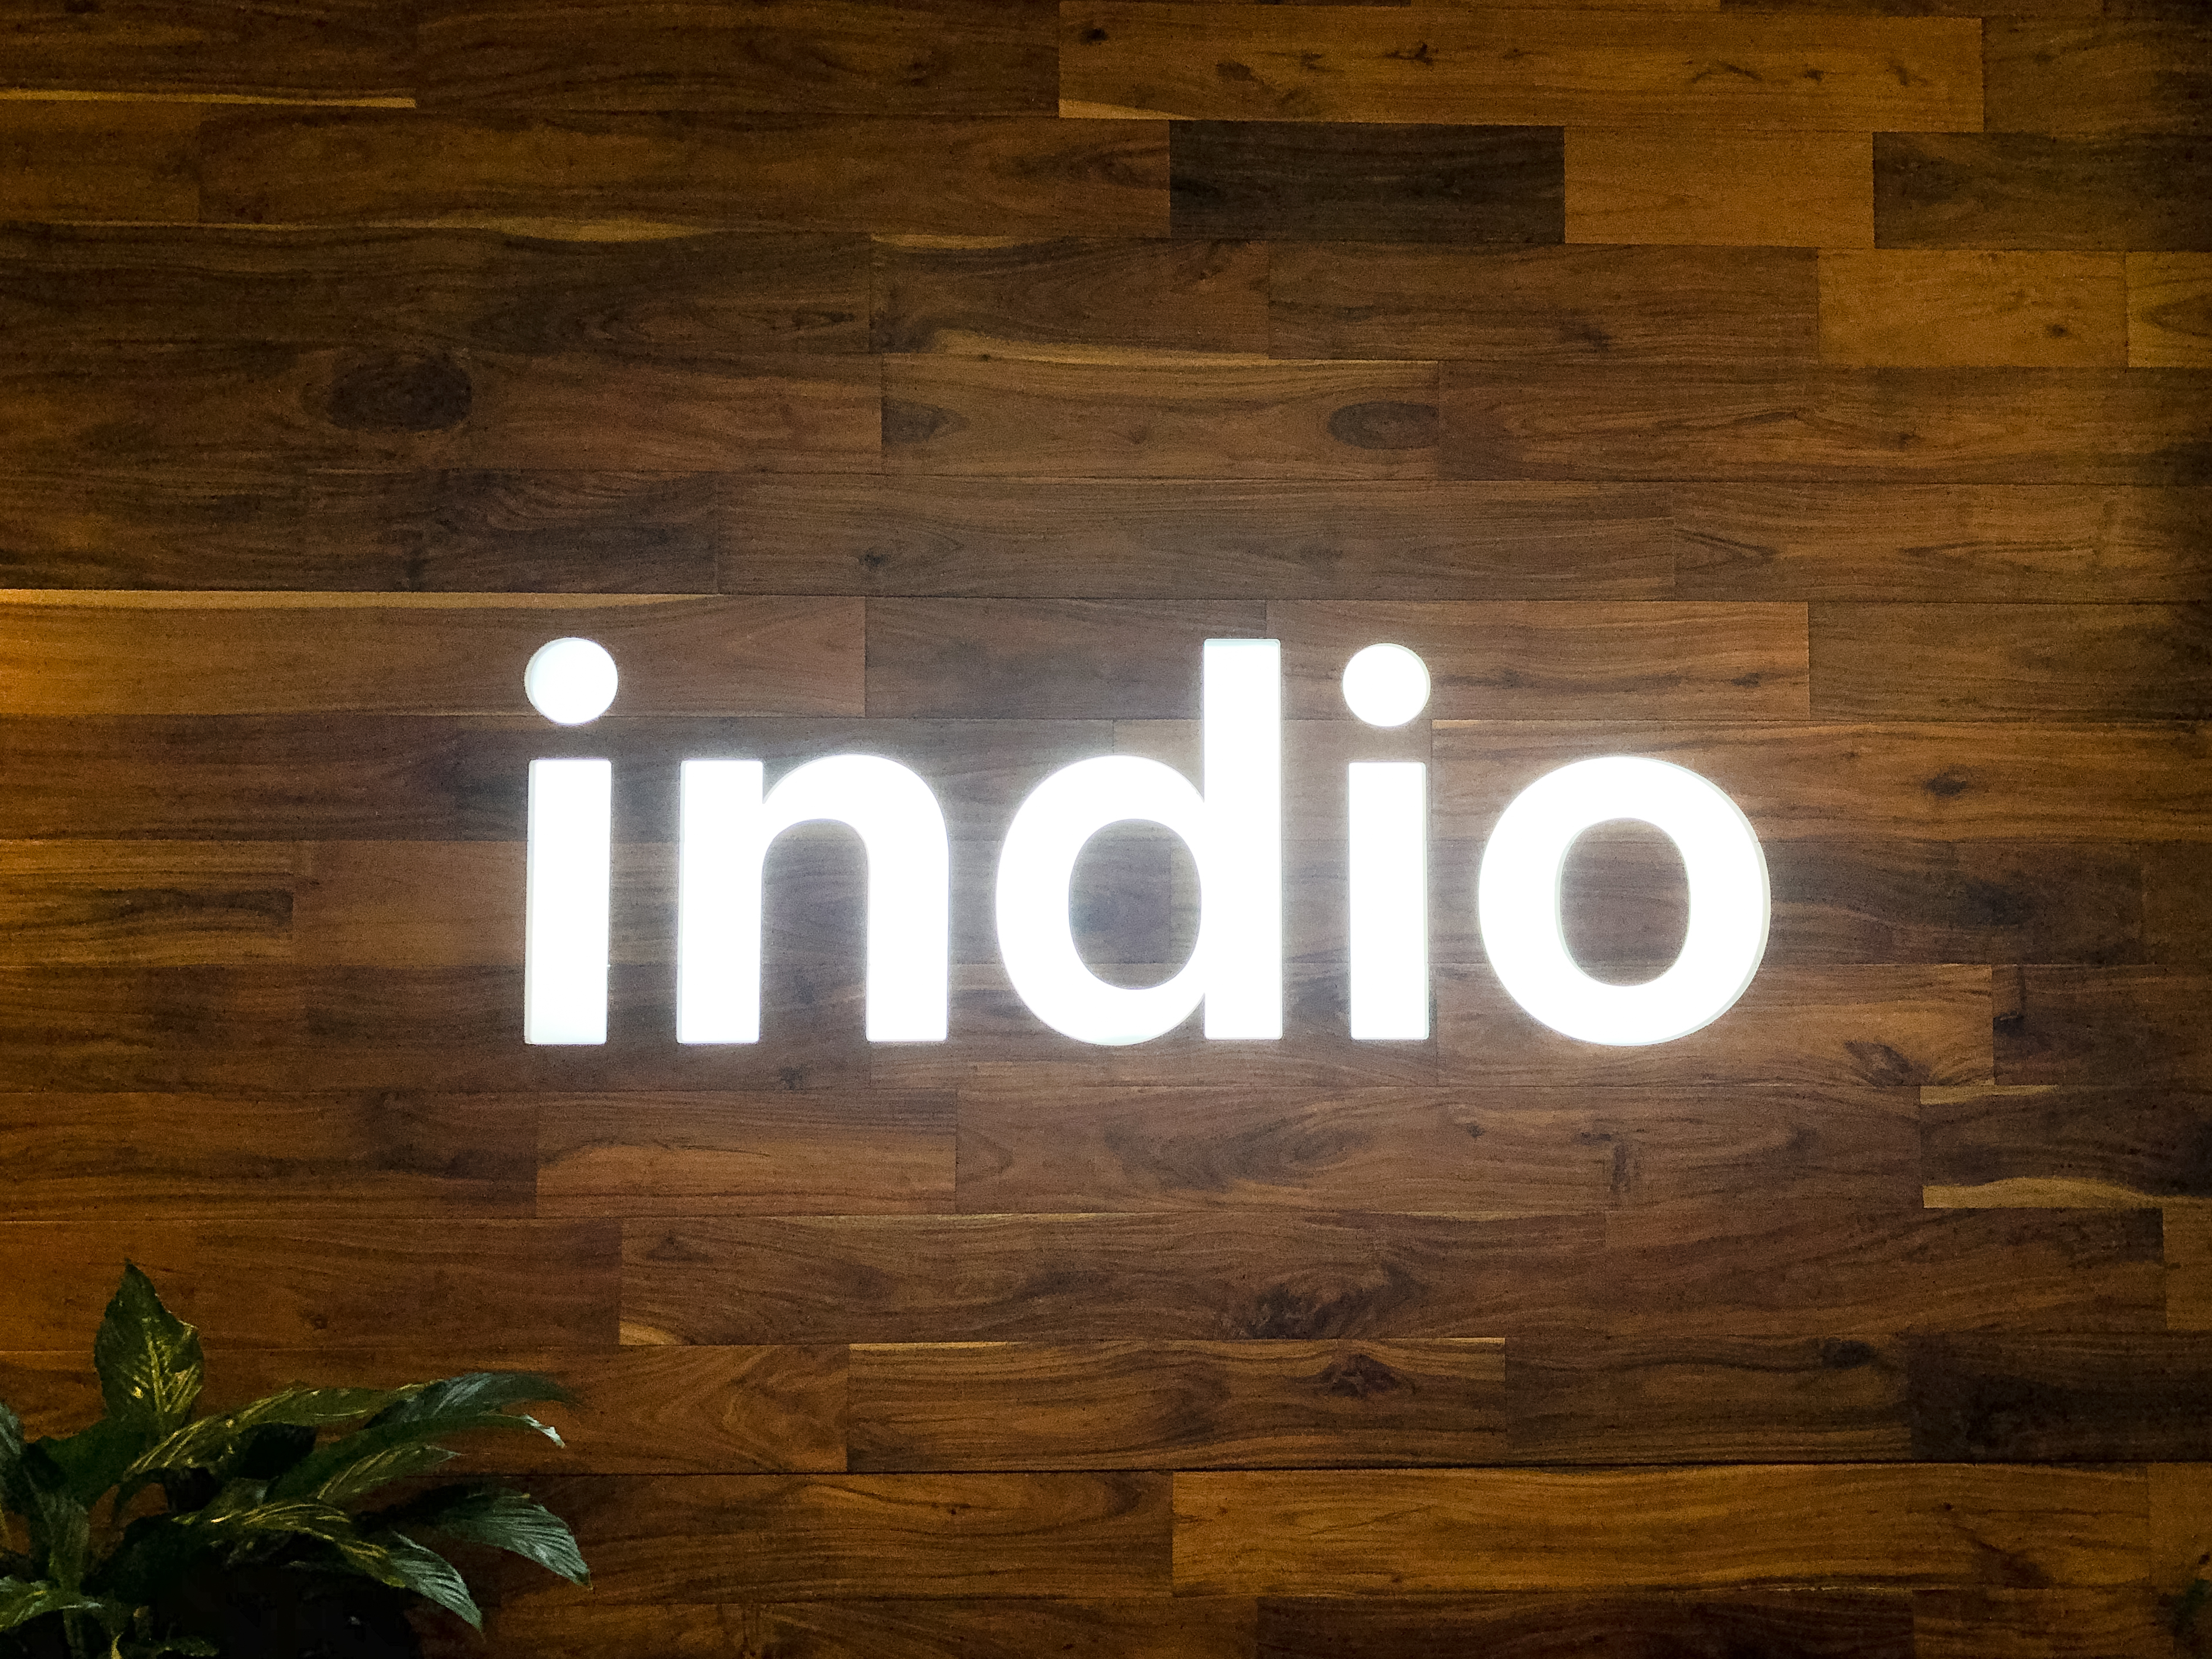 Full wall installation with dark wood and an illuminated, built-in logo for the San Francisco lobby of Indio, a company that simplifies the insurance application process for brokers and their clients.